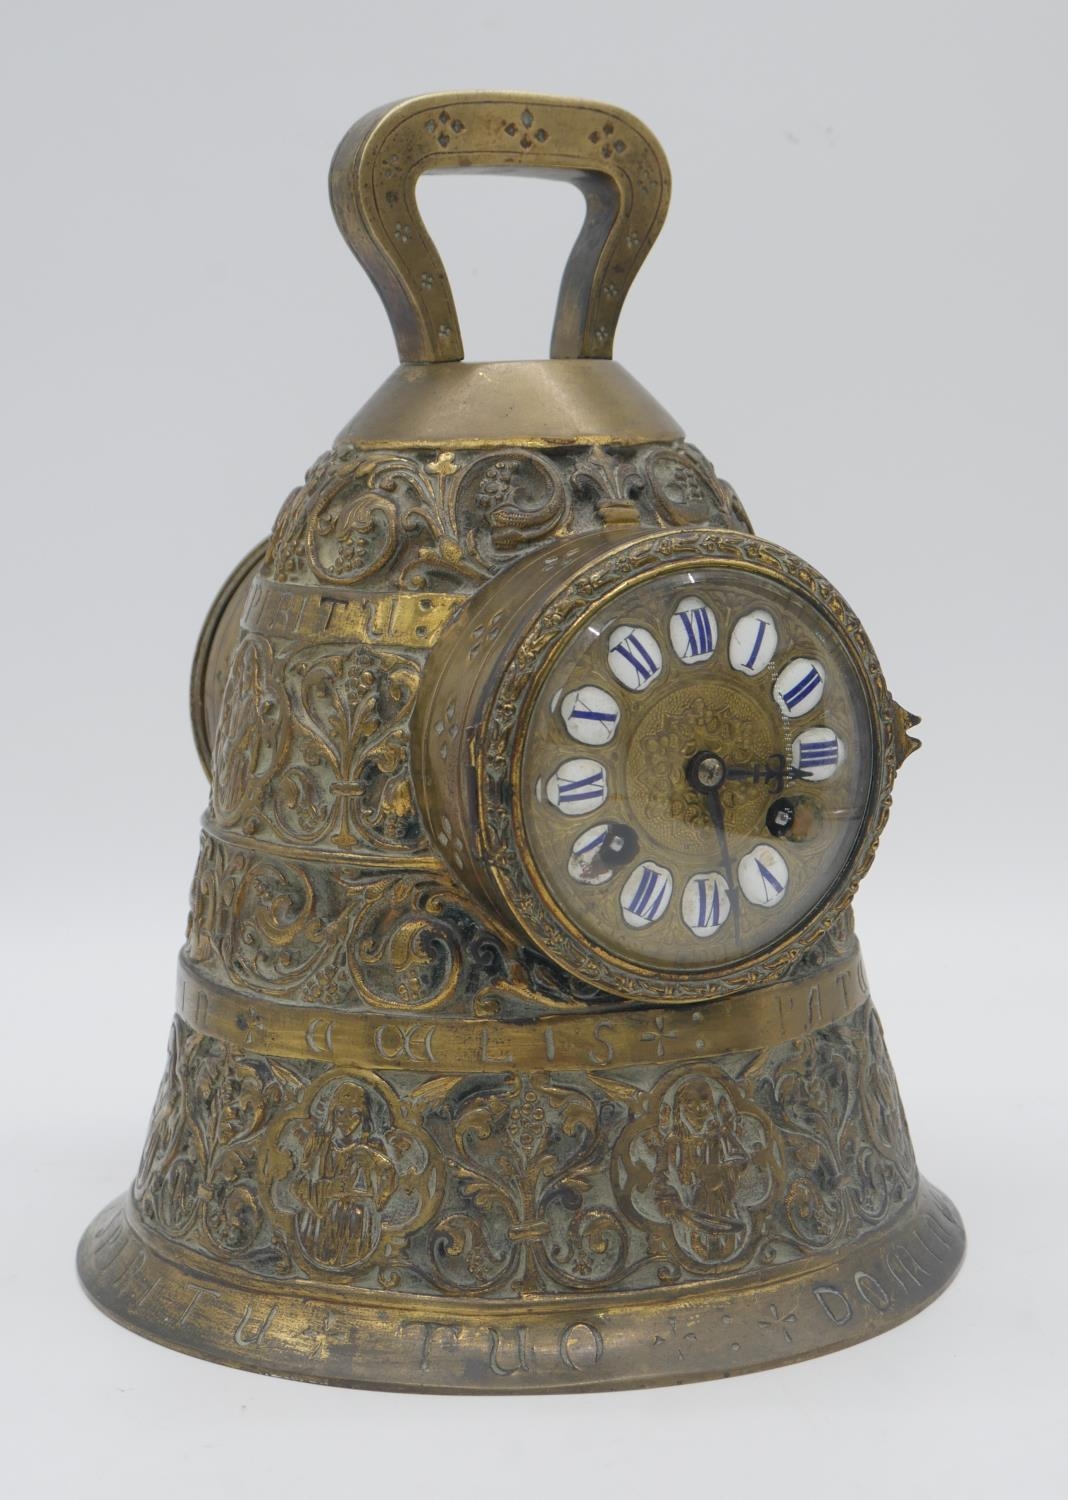 A 19th century French brass mantel clock modelled as a bell, the dial with enamel Roman numerals,